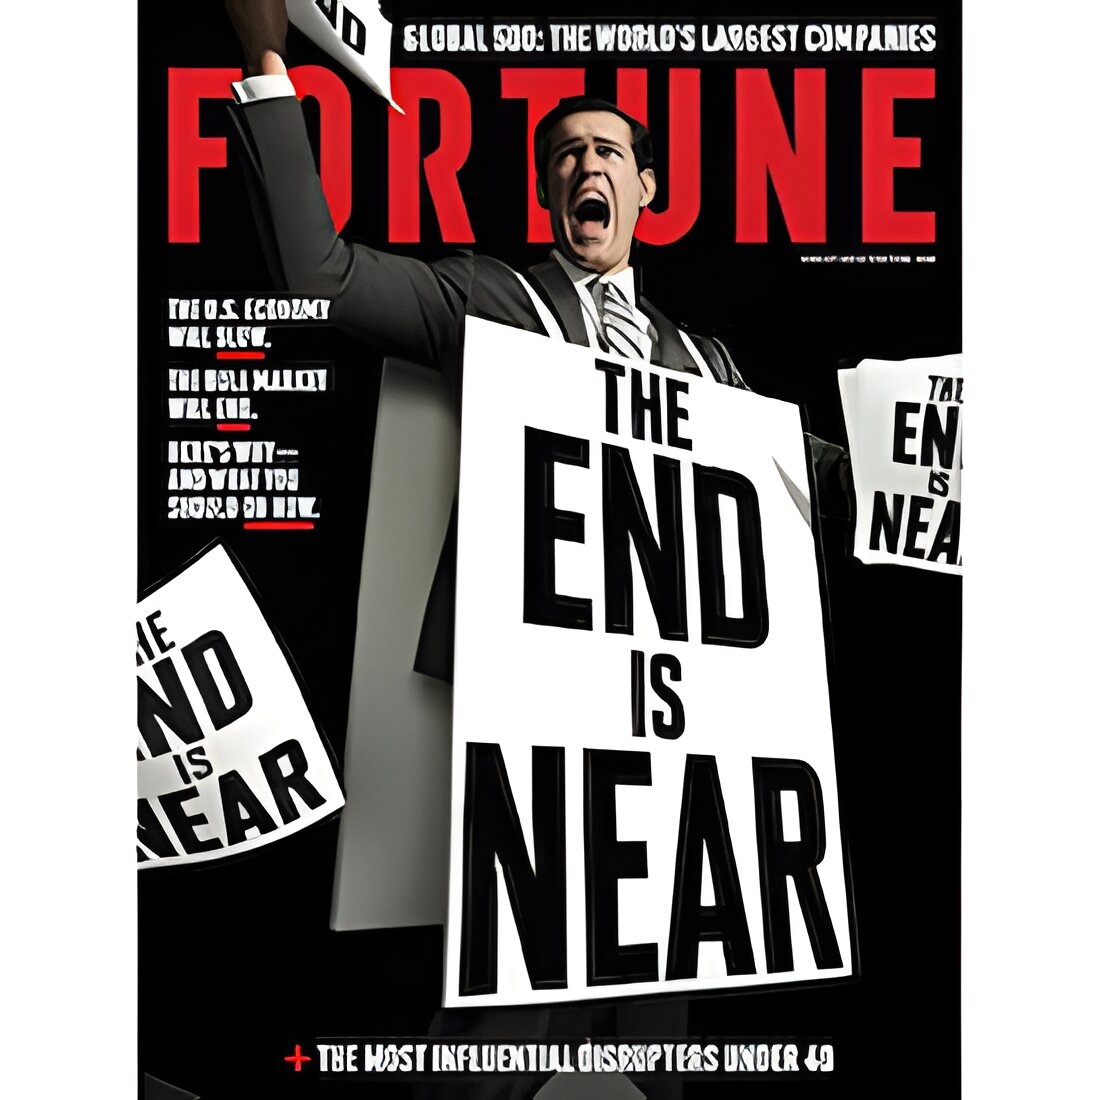 Free 2-Year Subscription To Fortune Magazine